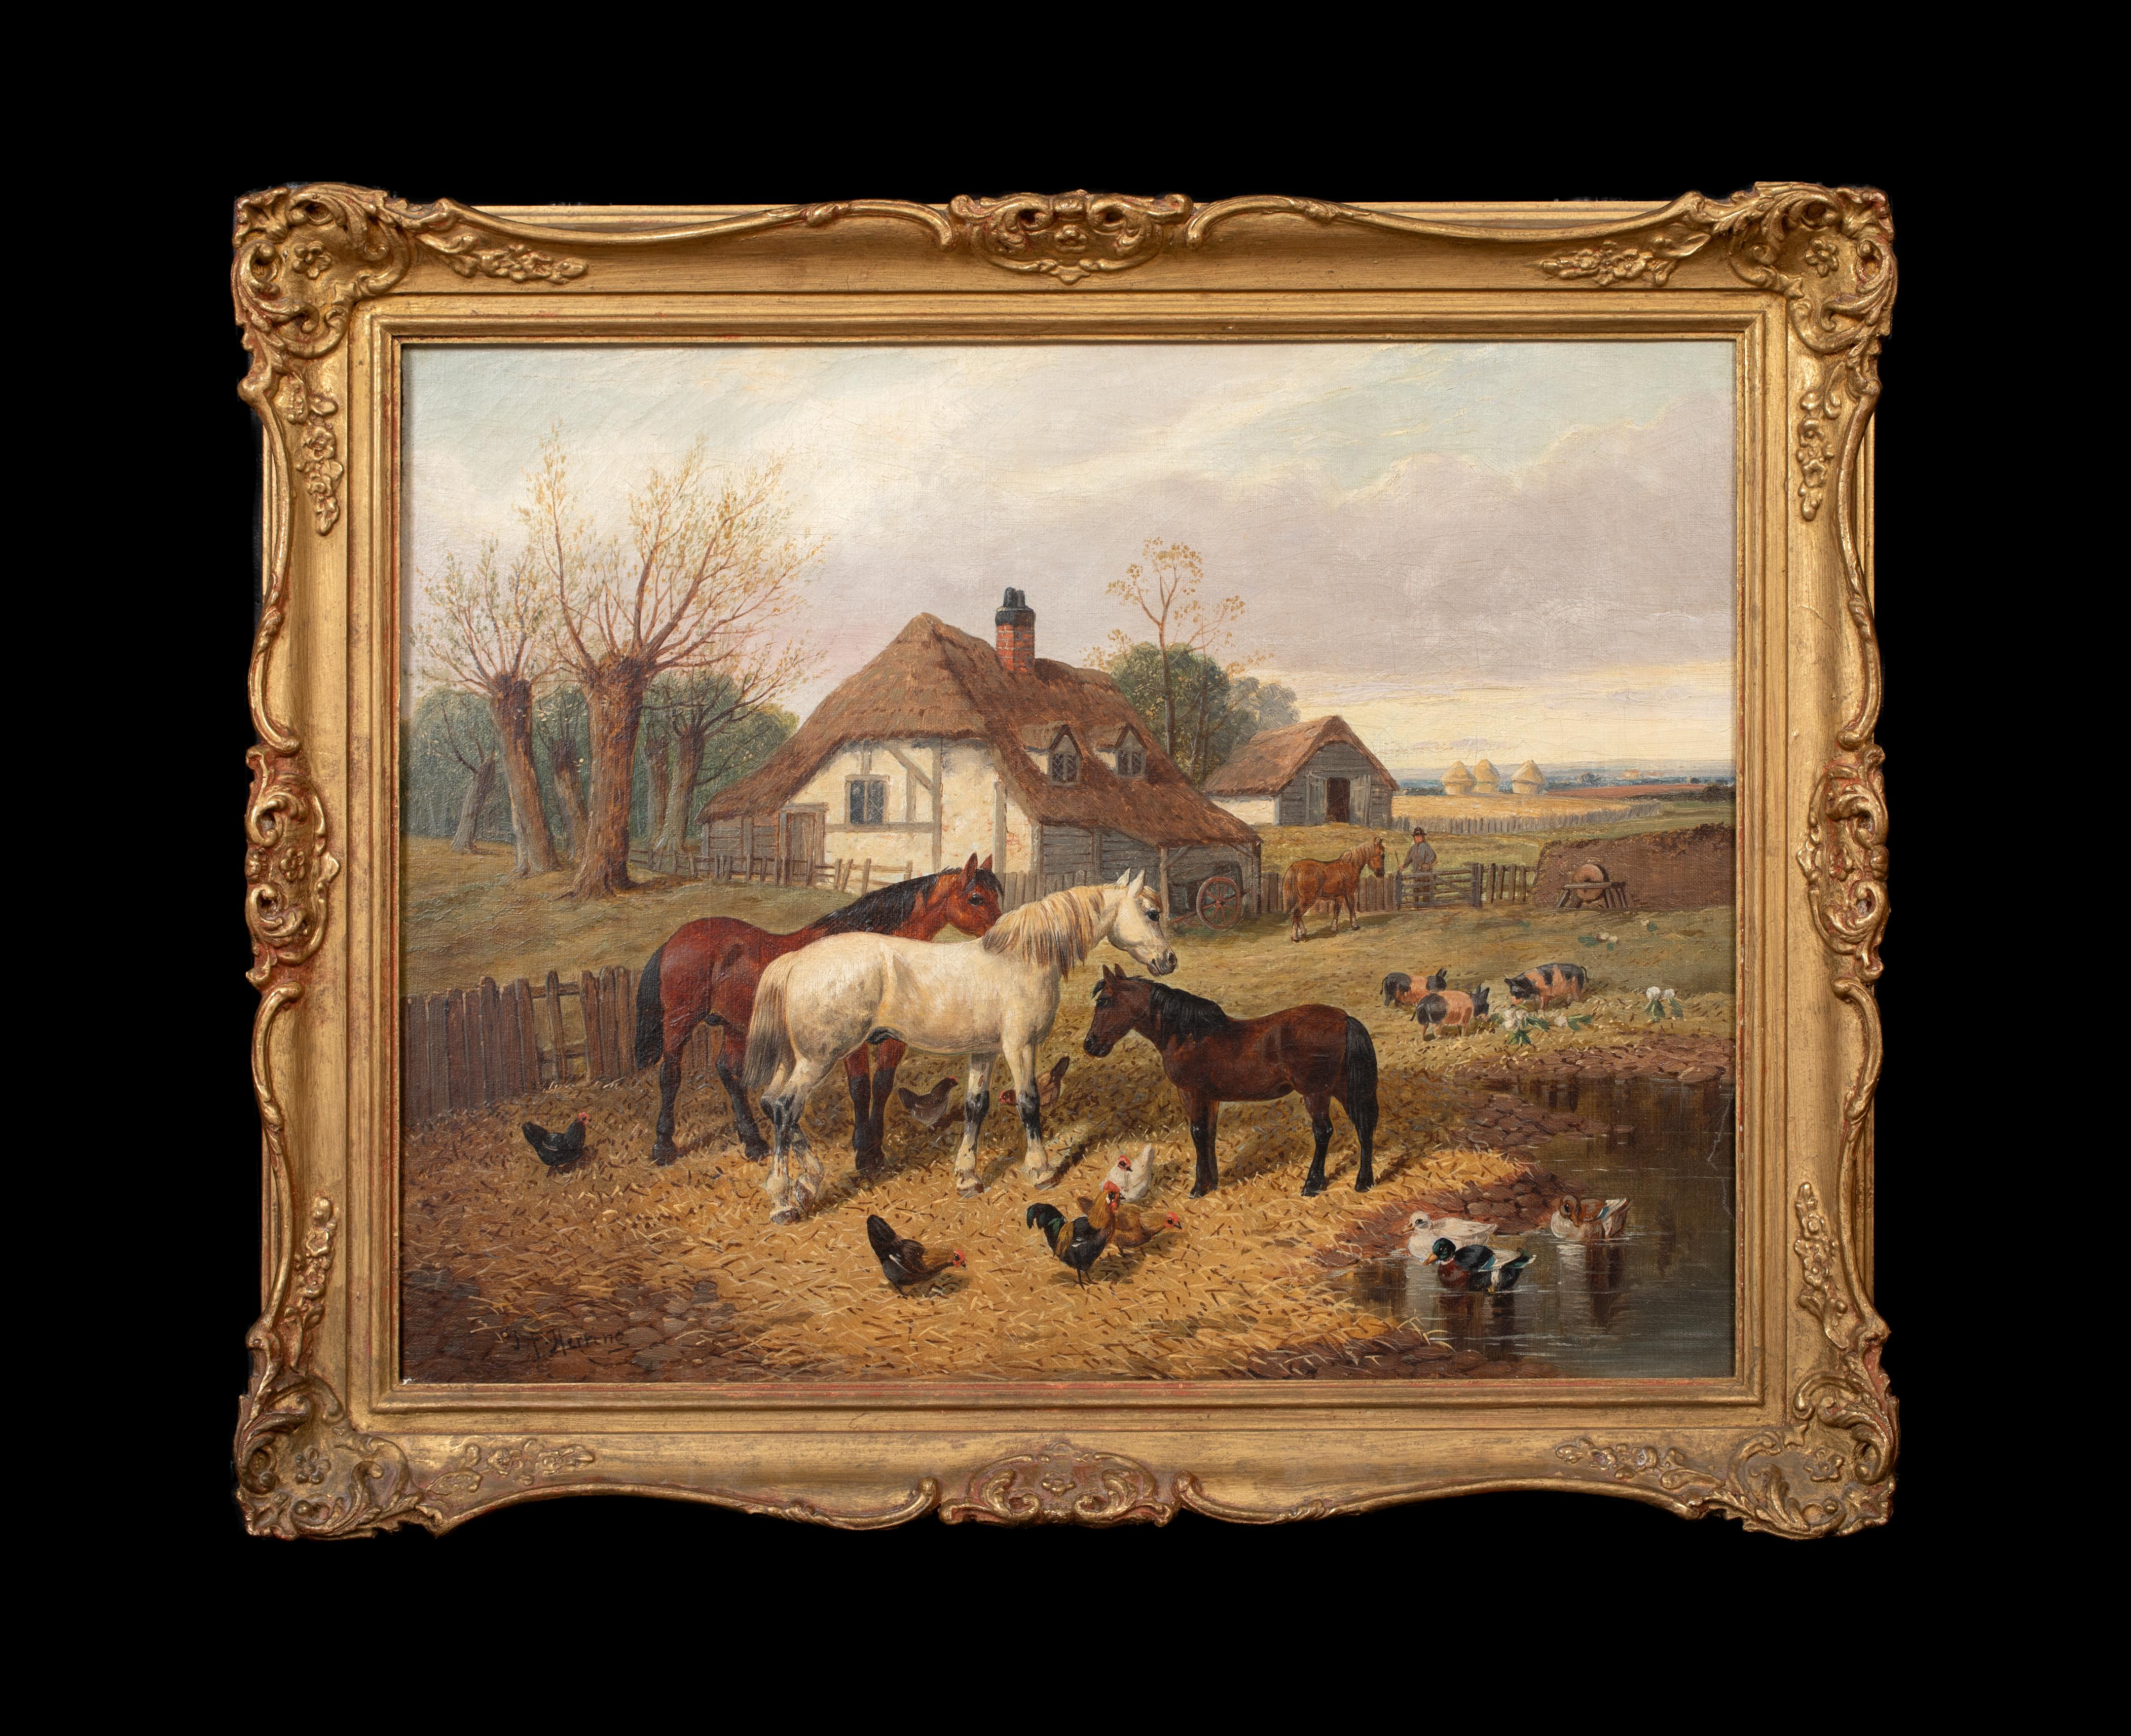 Horses, Chickens & Pigs On The Farm, 17th Century   by John Frederick II HERRING - Painting by John Frederick Herring Jr.